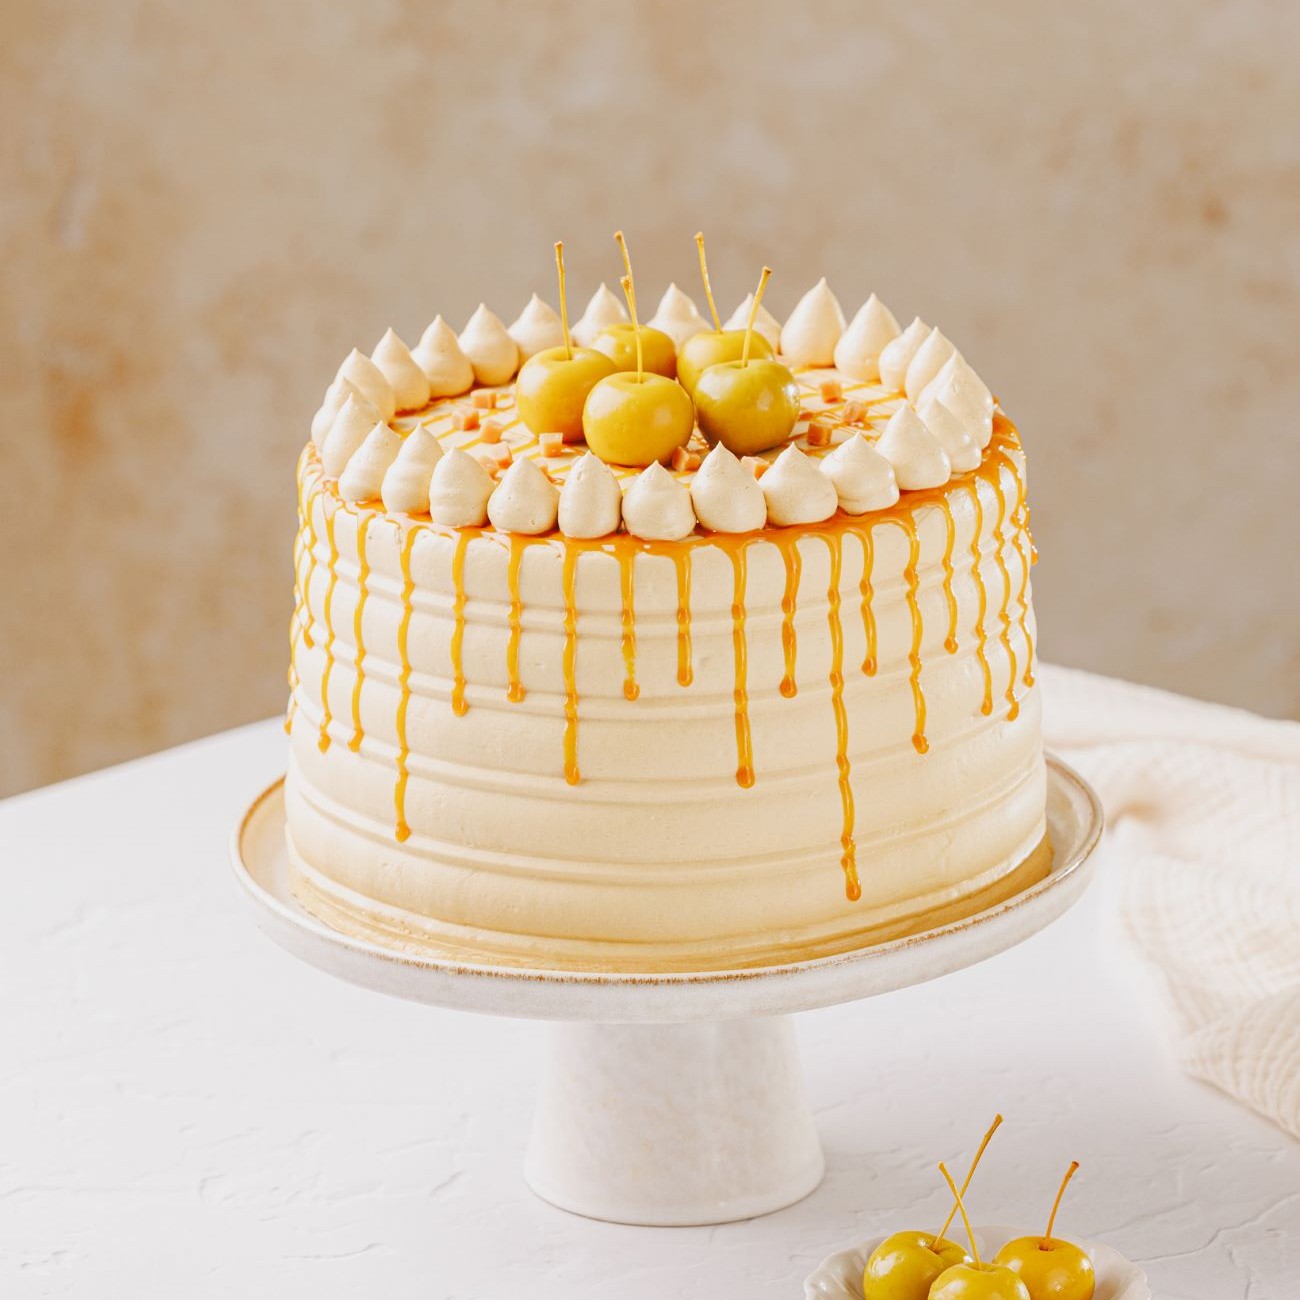 Free Online Cake Delivery in Chennai -Upto 300₹ OFF| FNP